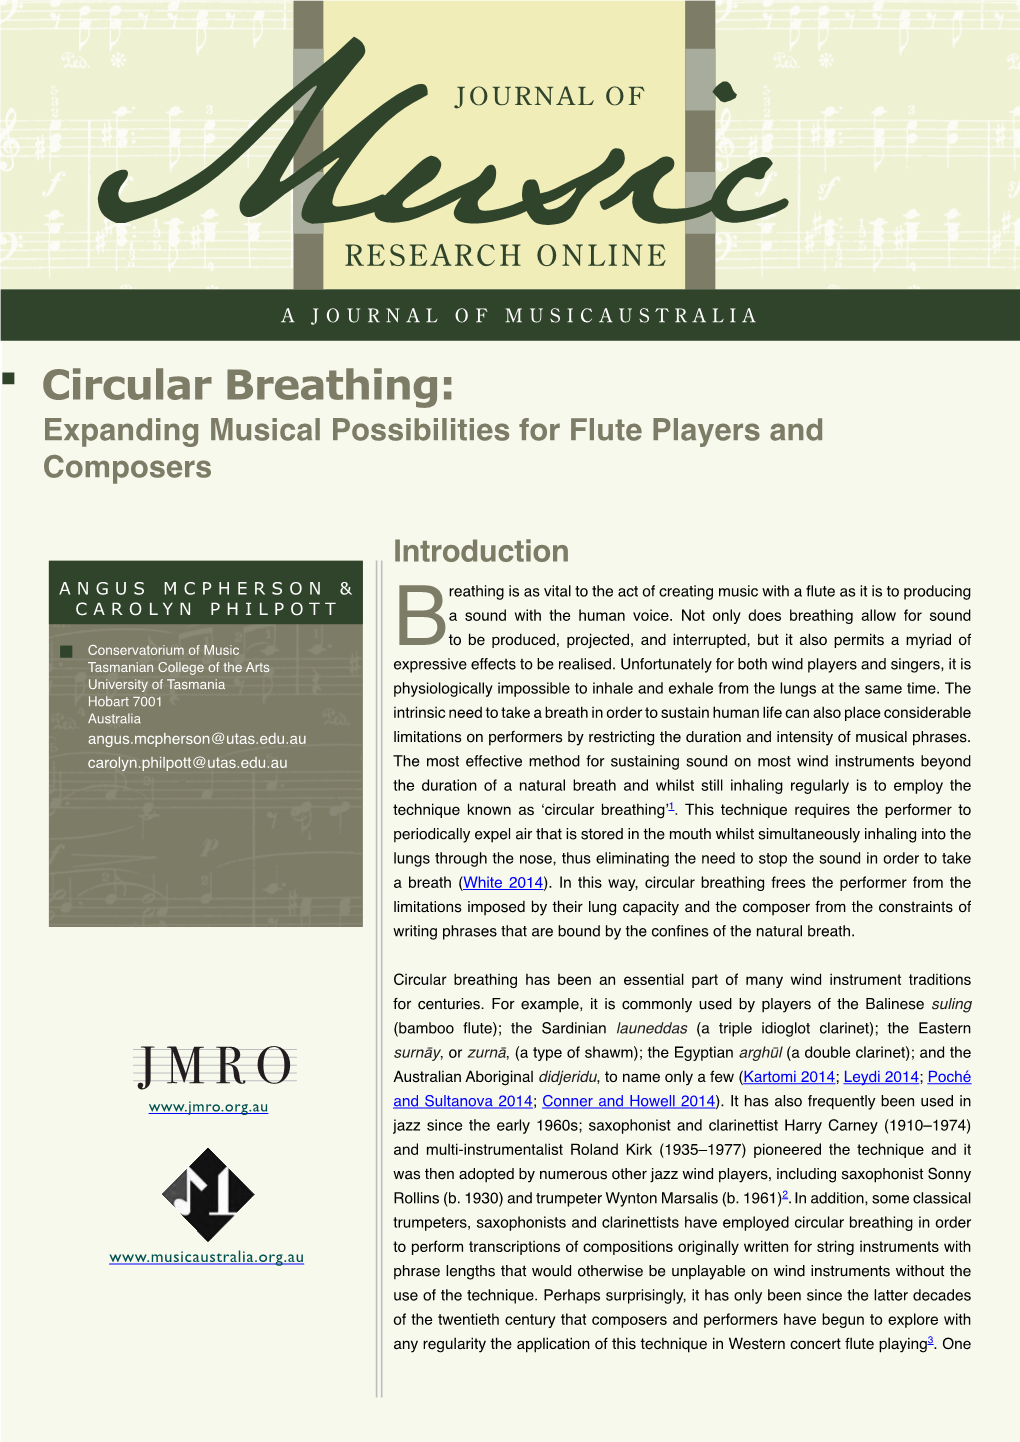 Circular Breathing: Expanding Musical Possibilities for Flute Players and Composers